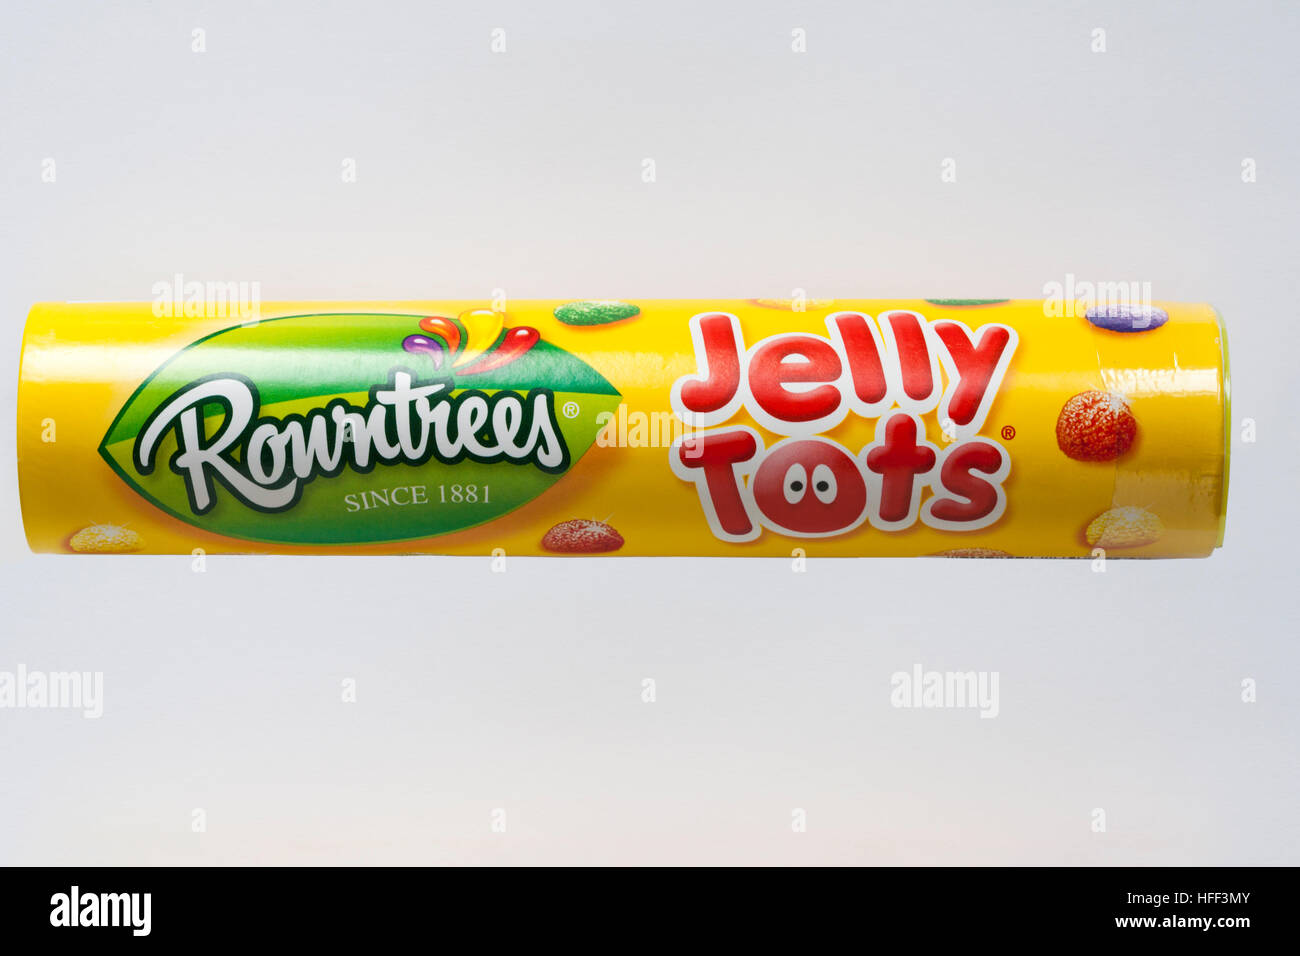 Tube of Rowntrees Jelly Tots isolated on white background Stock Photo